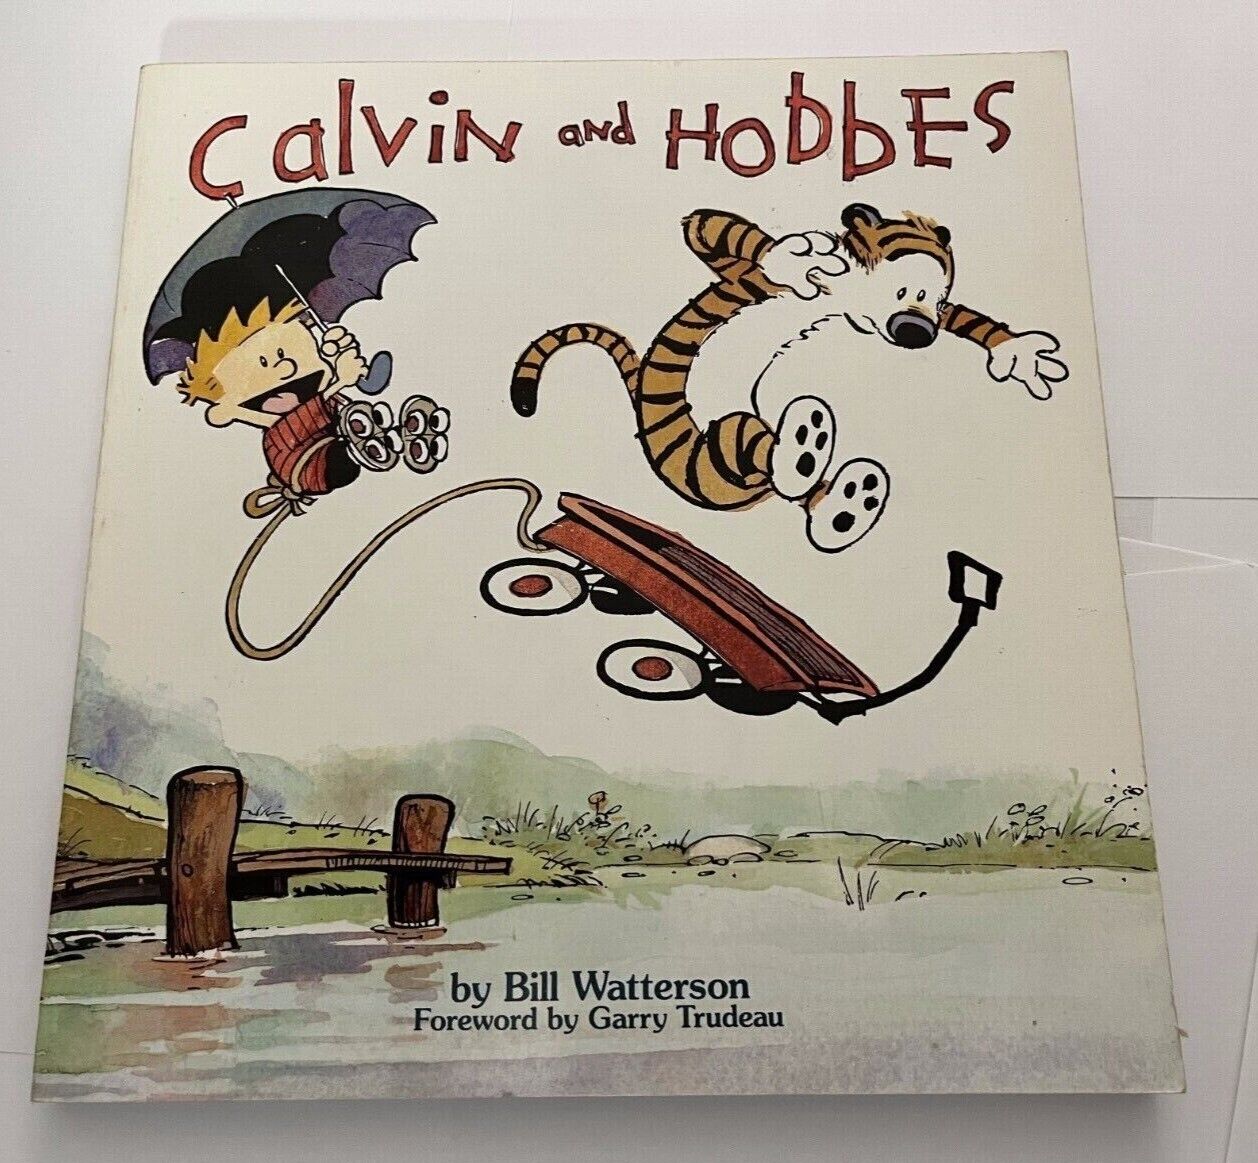 Calvin and Hobbes (Andrews McMeel, February 1987)